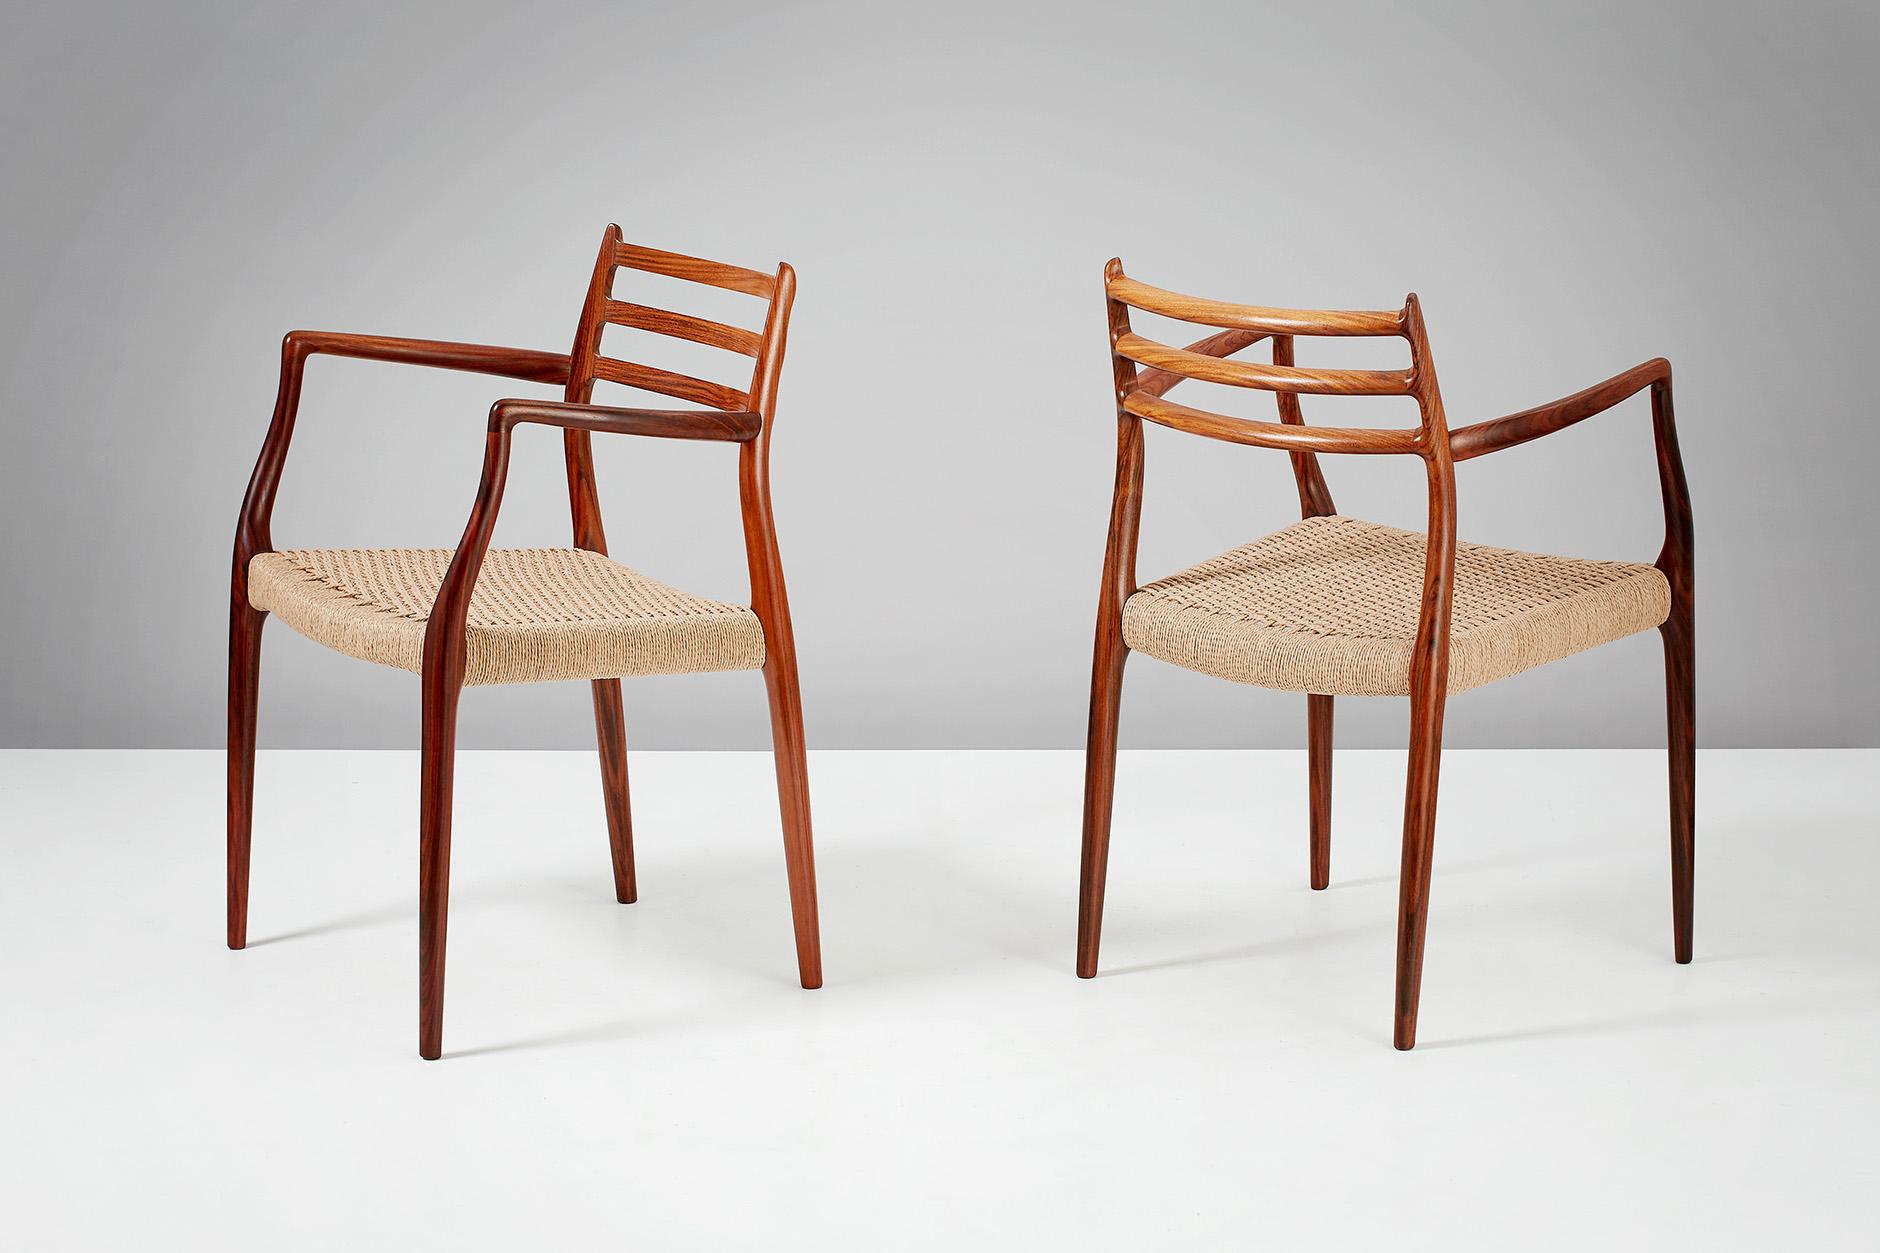 Niels Moller

Model 62 armchair, 1962.

Rosewood armchairs designed by Niels Moller for J.L. Moller Mobelfabrik, Denmark, 1962. Newly woven papercord seats.

Measures: H 80cm / D 55cm / W 56cm.
 